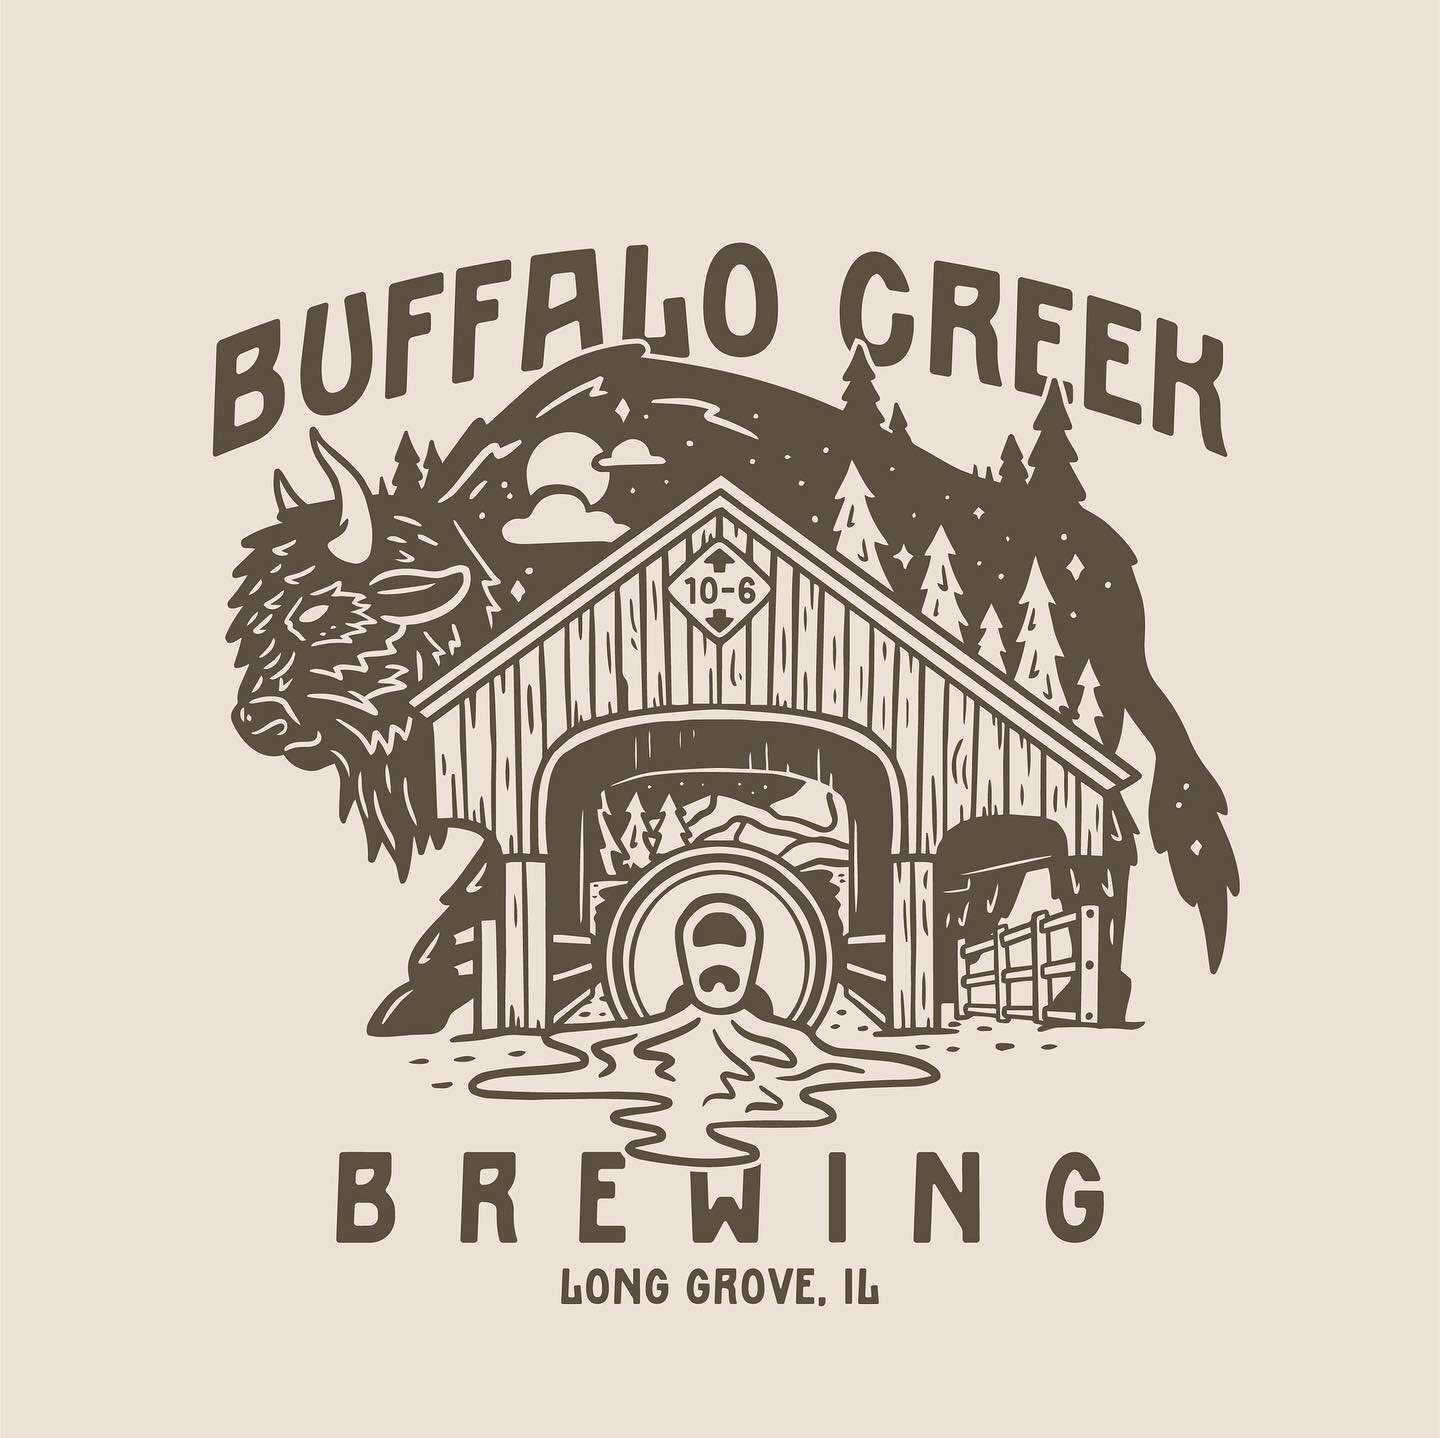 New Graphic Tee for this months @shirtsontap October Box for @buffalocreekbrewing!
If you like this tee and want to try their beer, you can get them both by subscribing to a membership.
Thanks SOT! 👕 🍻 
#shirtsontap #buffalocreekbrewing #canvasdesi